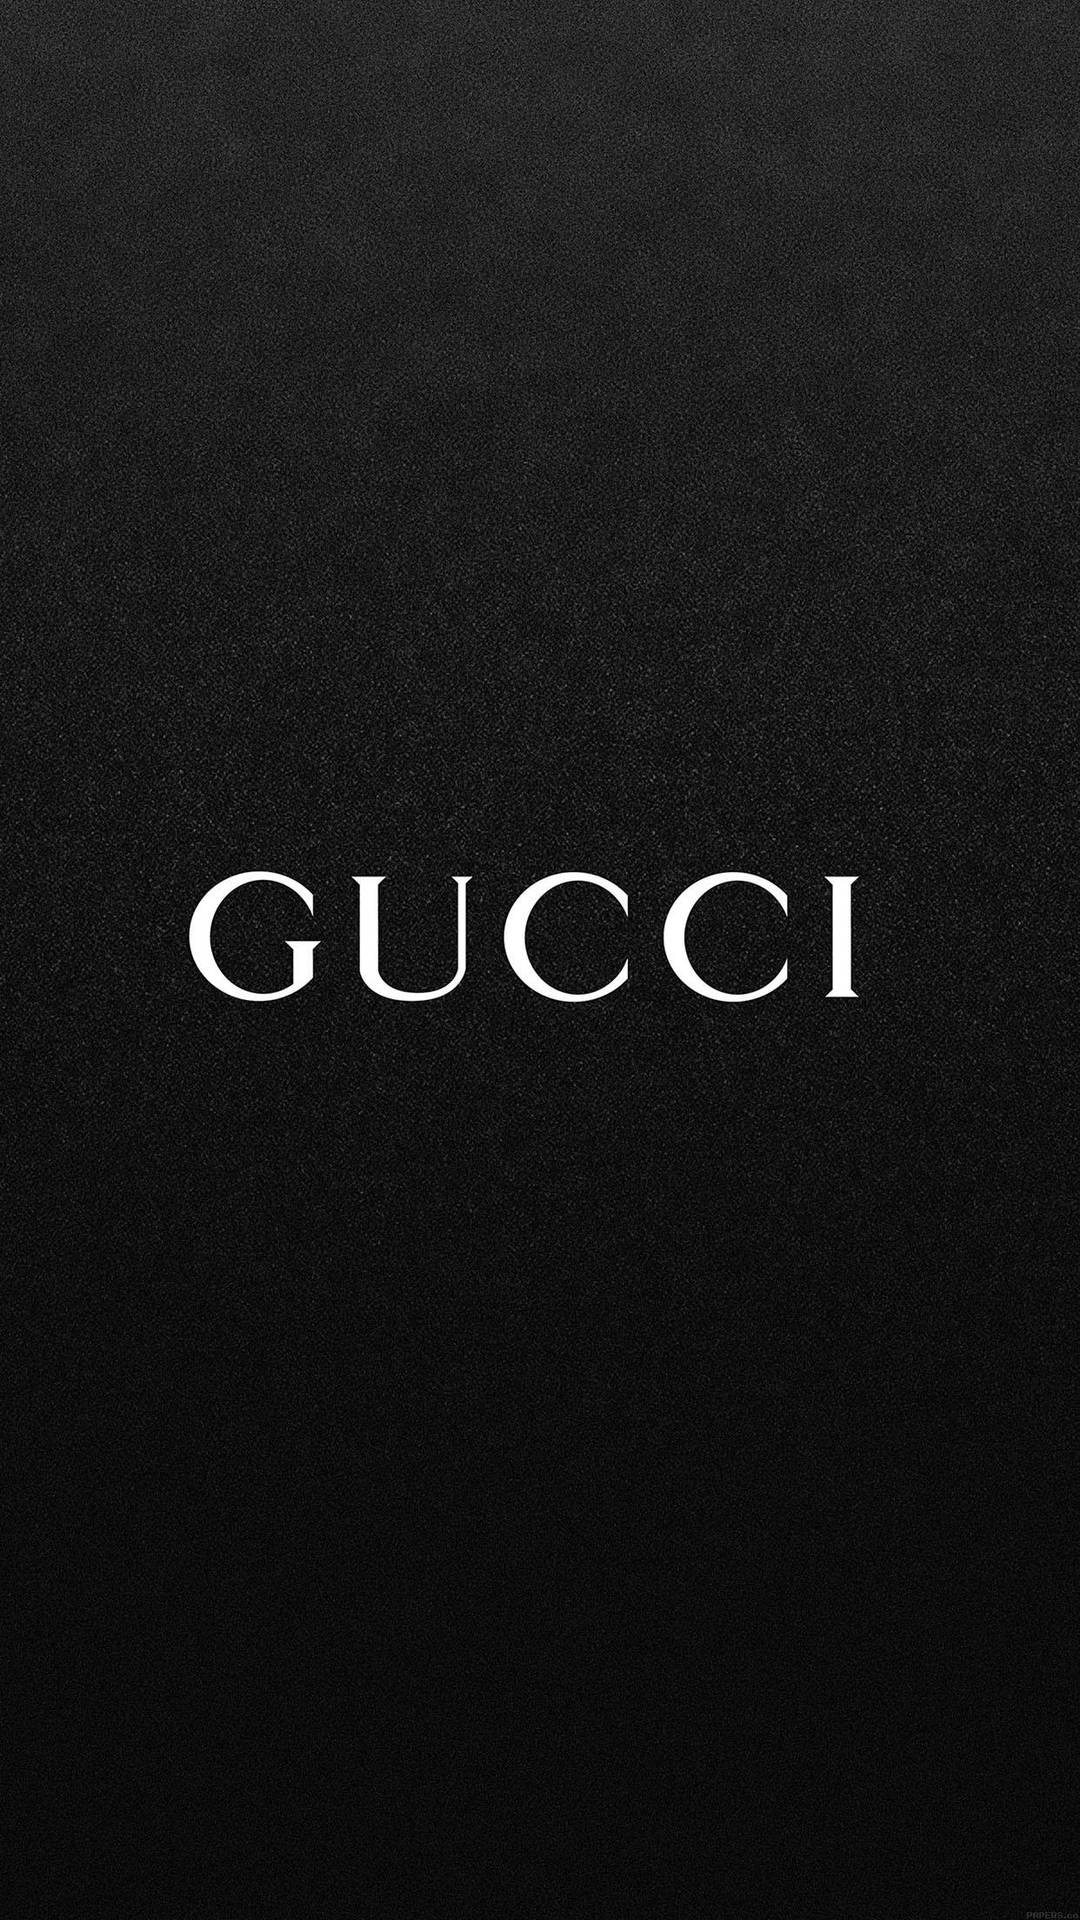 Simple Gucci Iphone Background Background